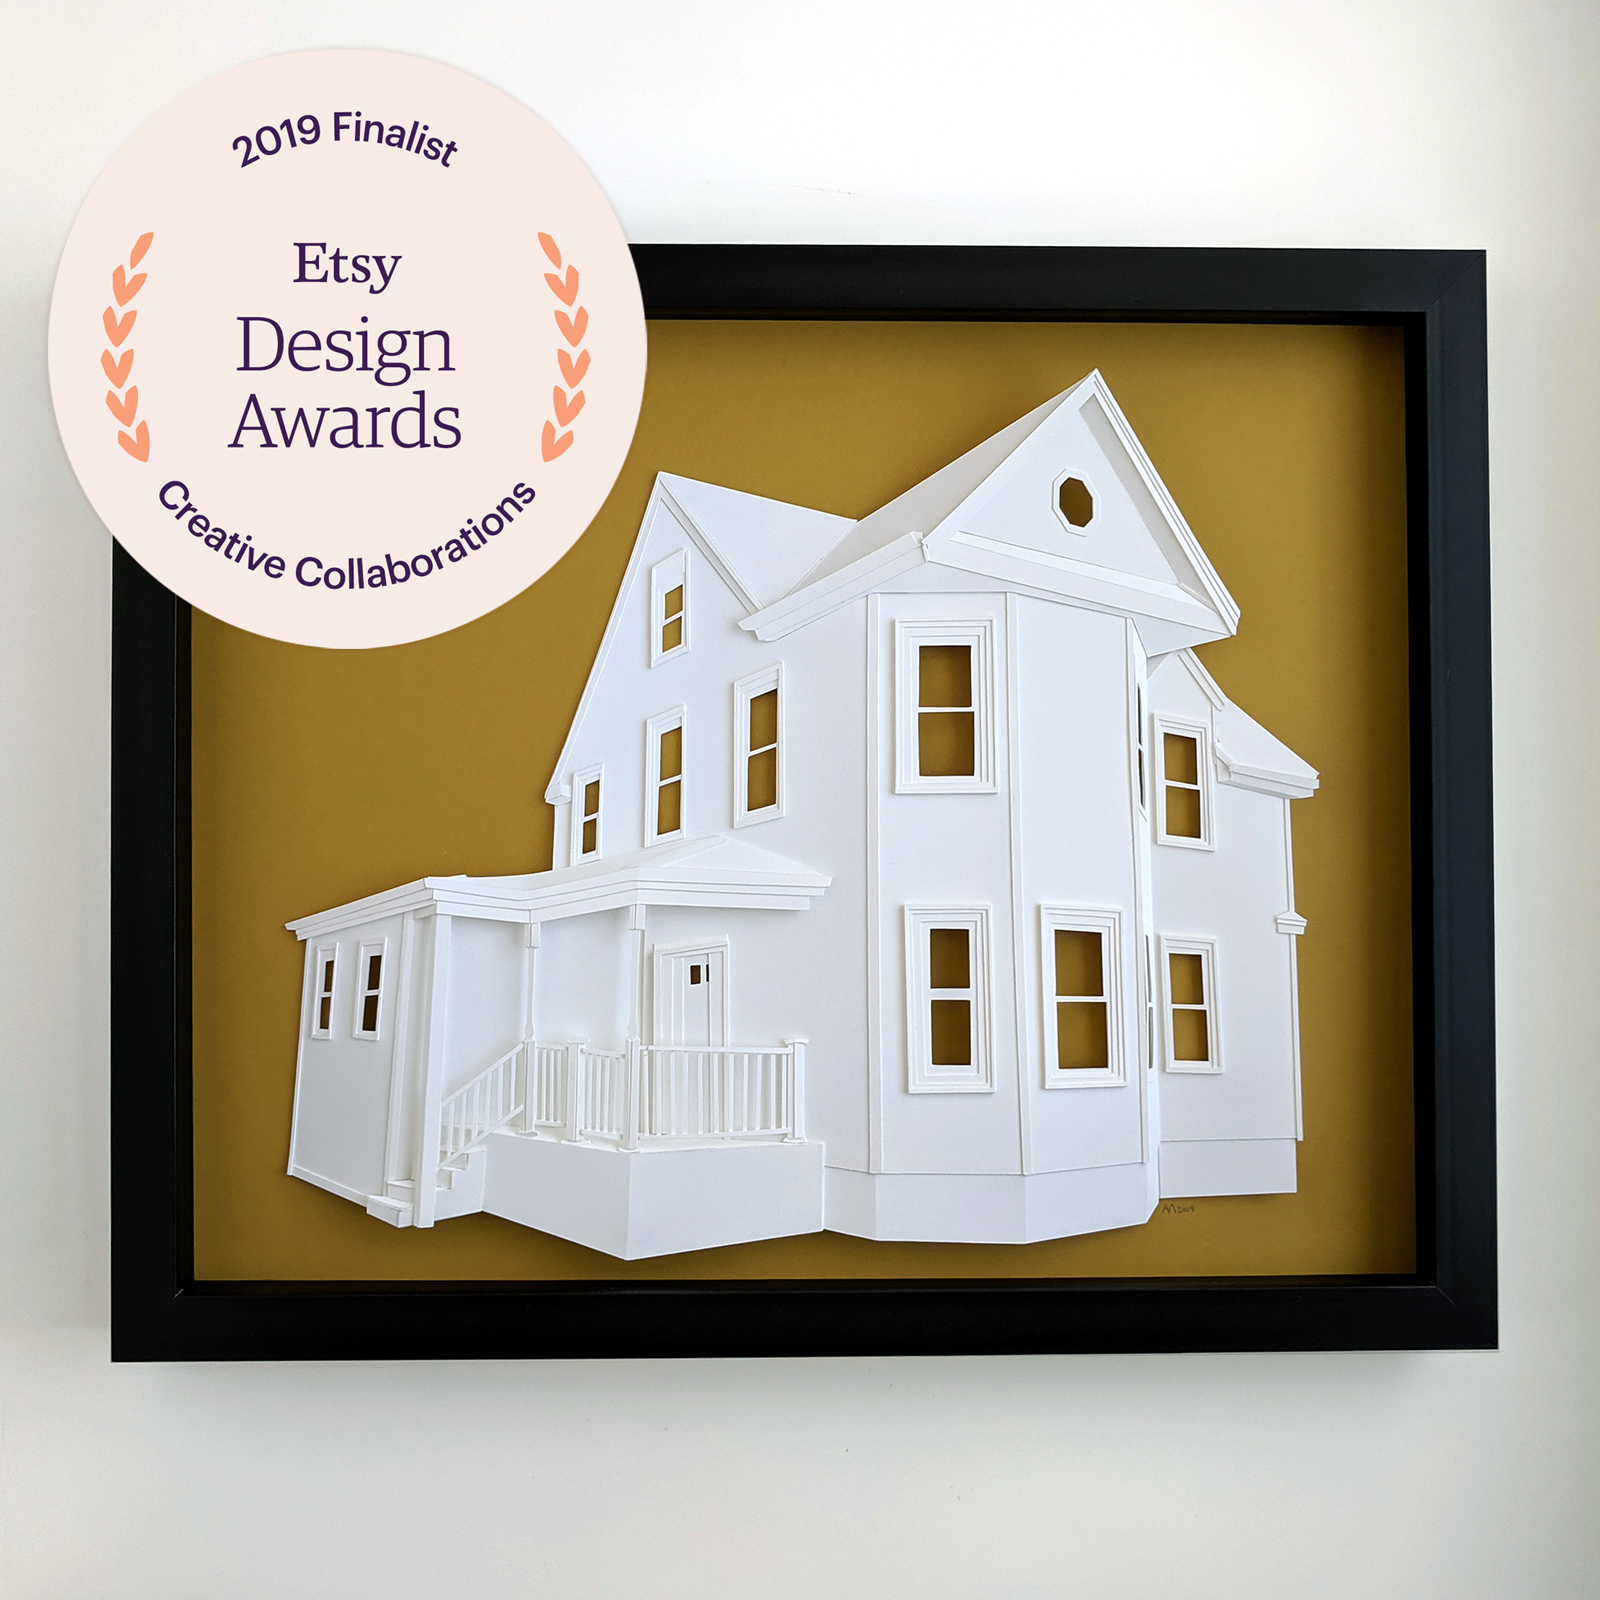 Custom house portrait made of paper depicting a large house with a deep front porch, overlaid with the Etsy Design Awards Creative Collaborations Finalist logo